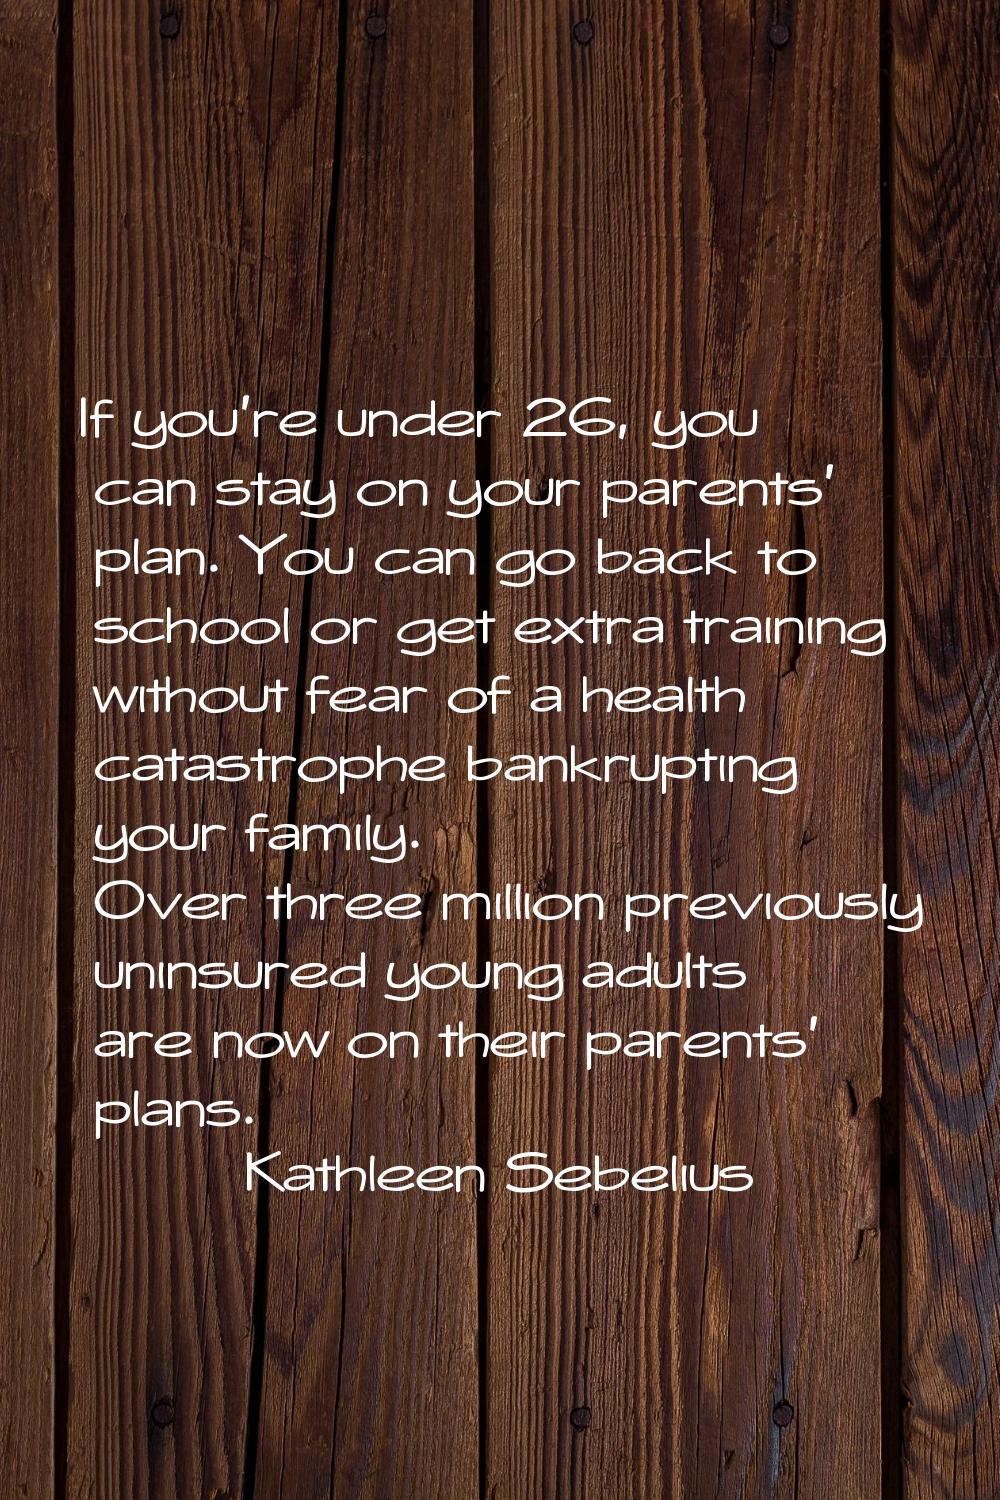 If you're under 26, you can stay on your parents' plan. You can go back to school or get extra trai